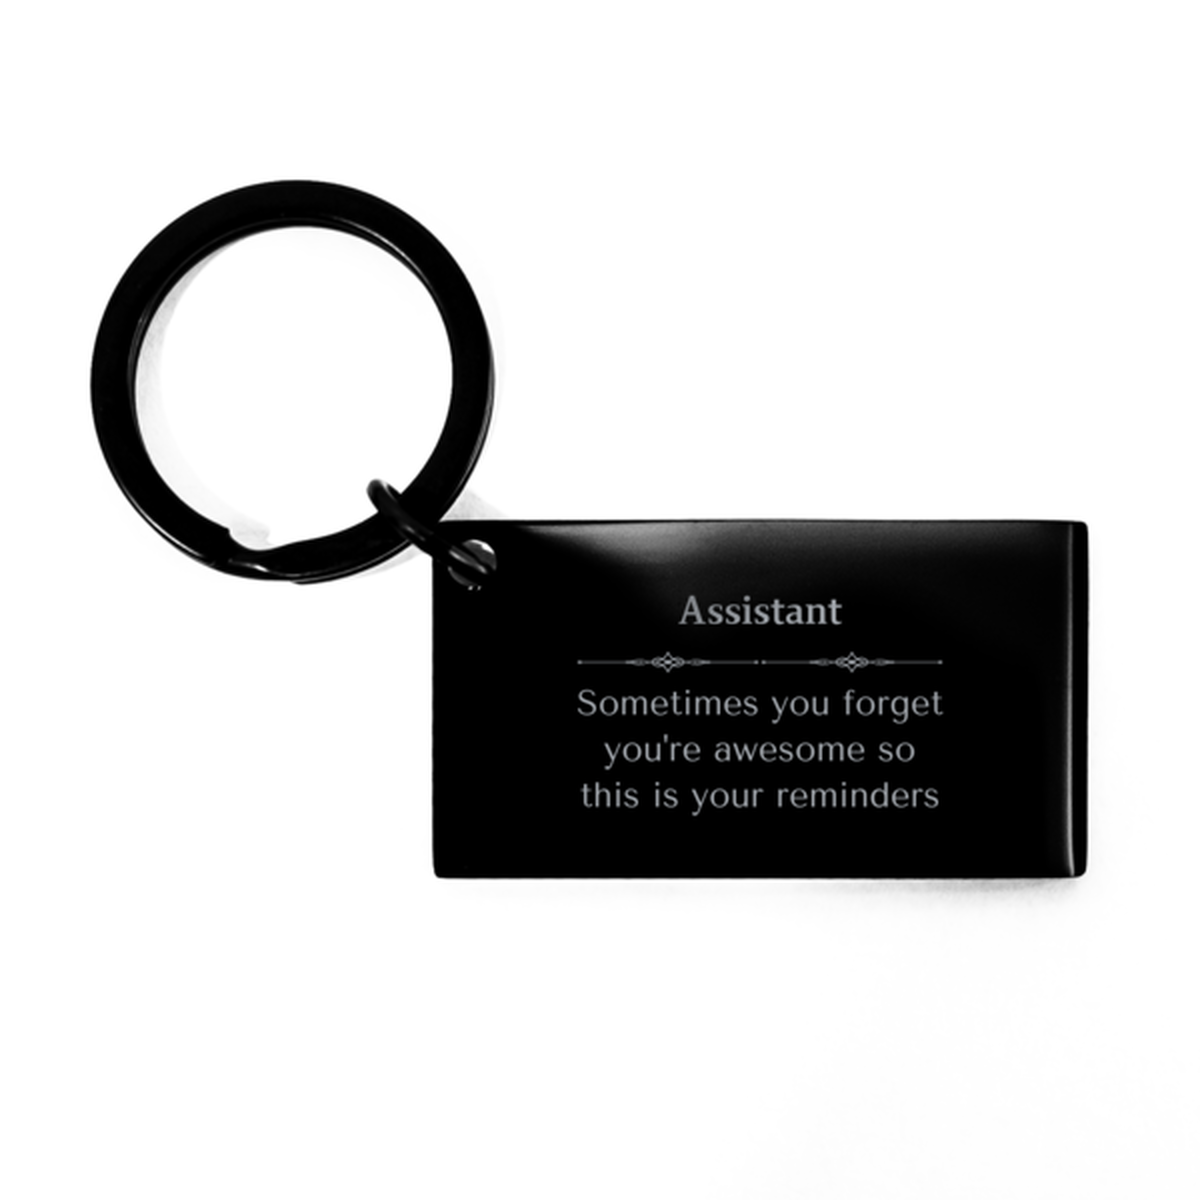 Sentimental Assistant Keychain, Computer Programmer Sometimes you forget you're awesome so this is your reminders, Graduation Christmas Birthday Gifts for Assistant, Men, Women, Coworkers